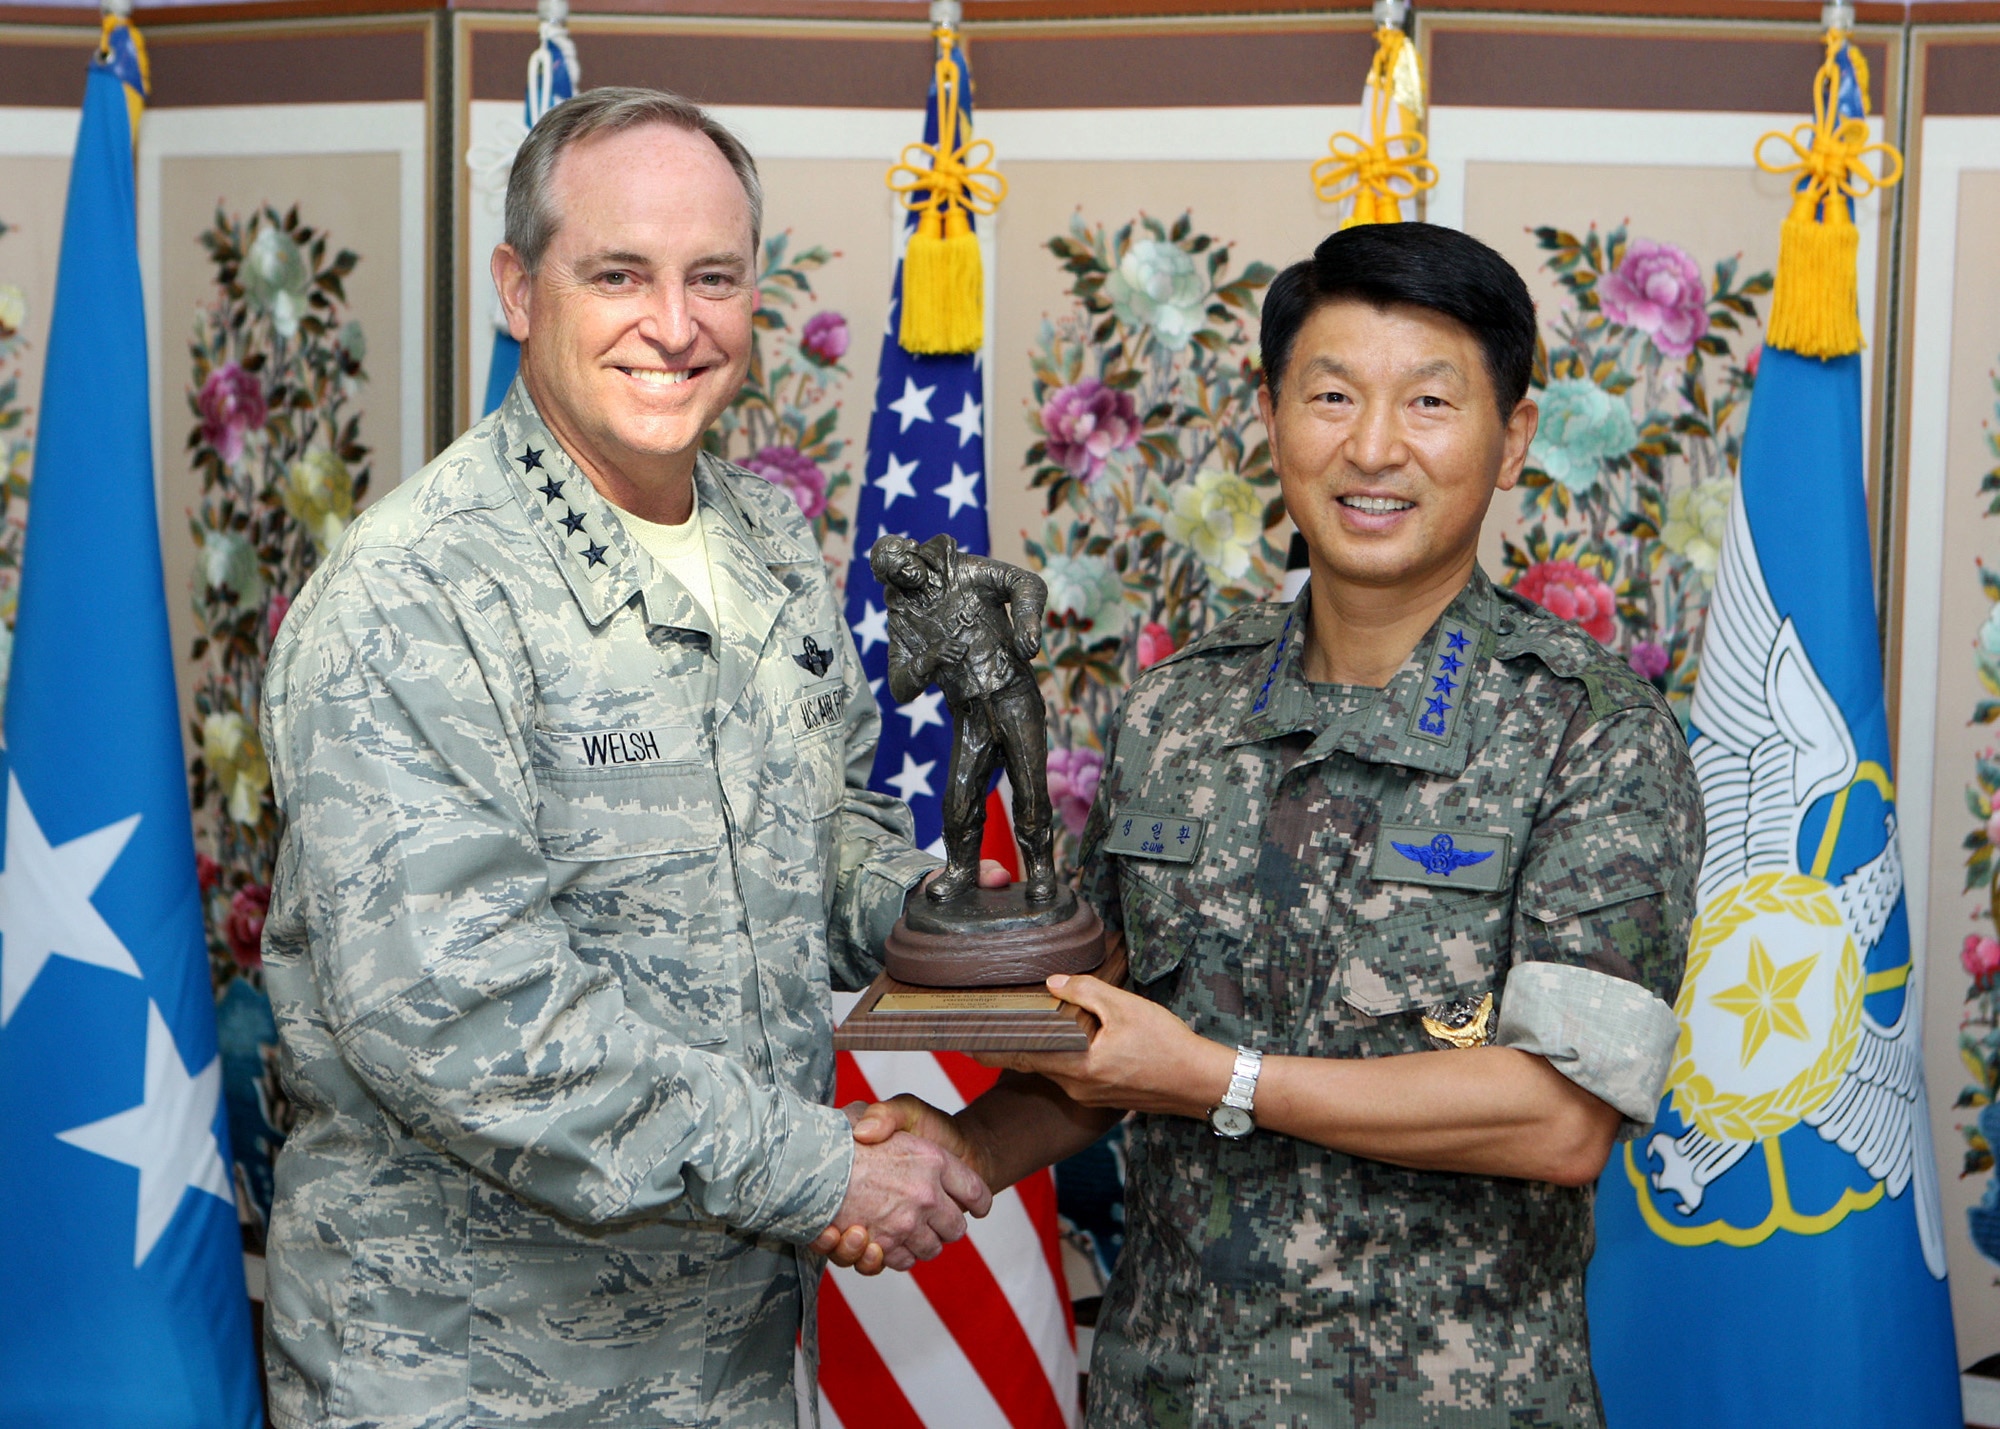 Air Force Chief of Staff Gen. Mark A. Welsh III and Republic of Korea Air Force Chief of Staff Gen. Sung Il-Hwan exchange gifts following a meeting in Seoul, Republic of Korea, Aug. 23, 2013. As part of a two-week tour of the Pacific, Welsh met with military partners in Korea and Japan, as well as Airmen and their families, to discuss opportunities and challenges in the
region.